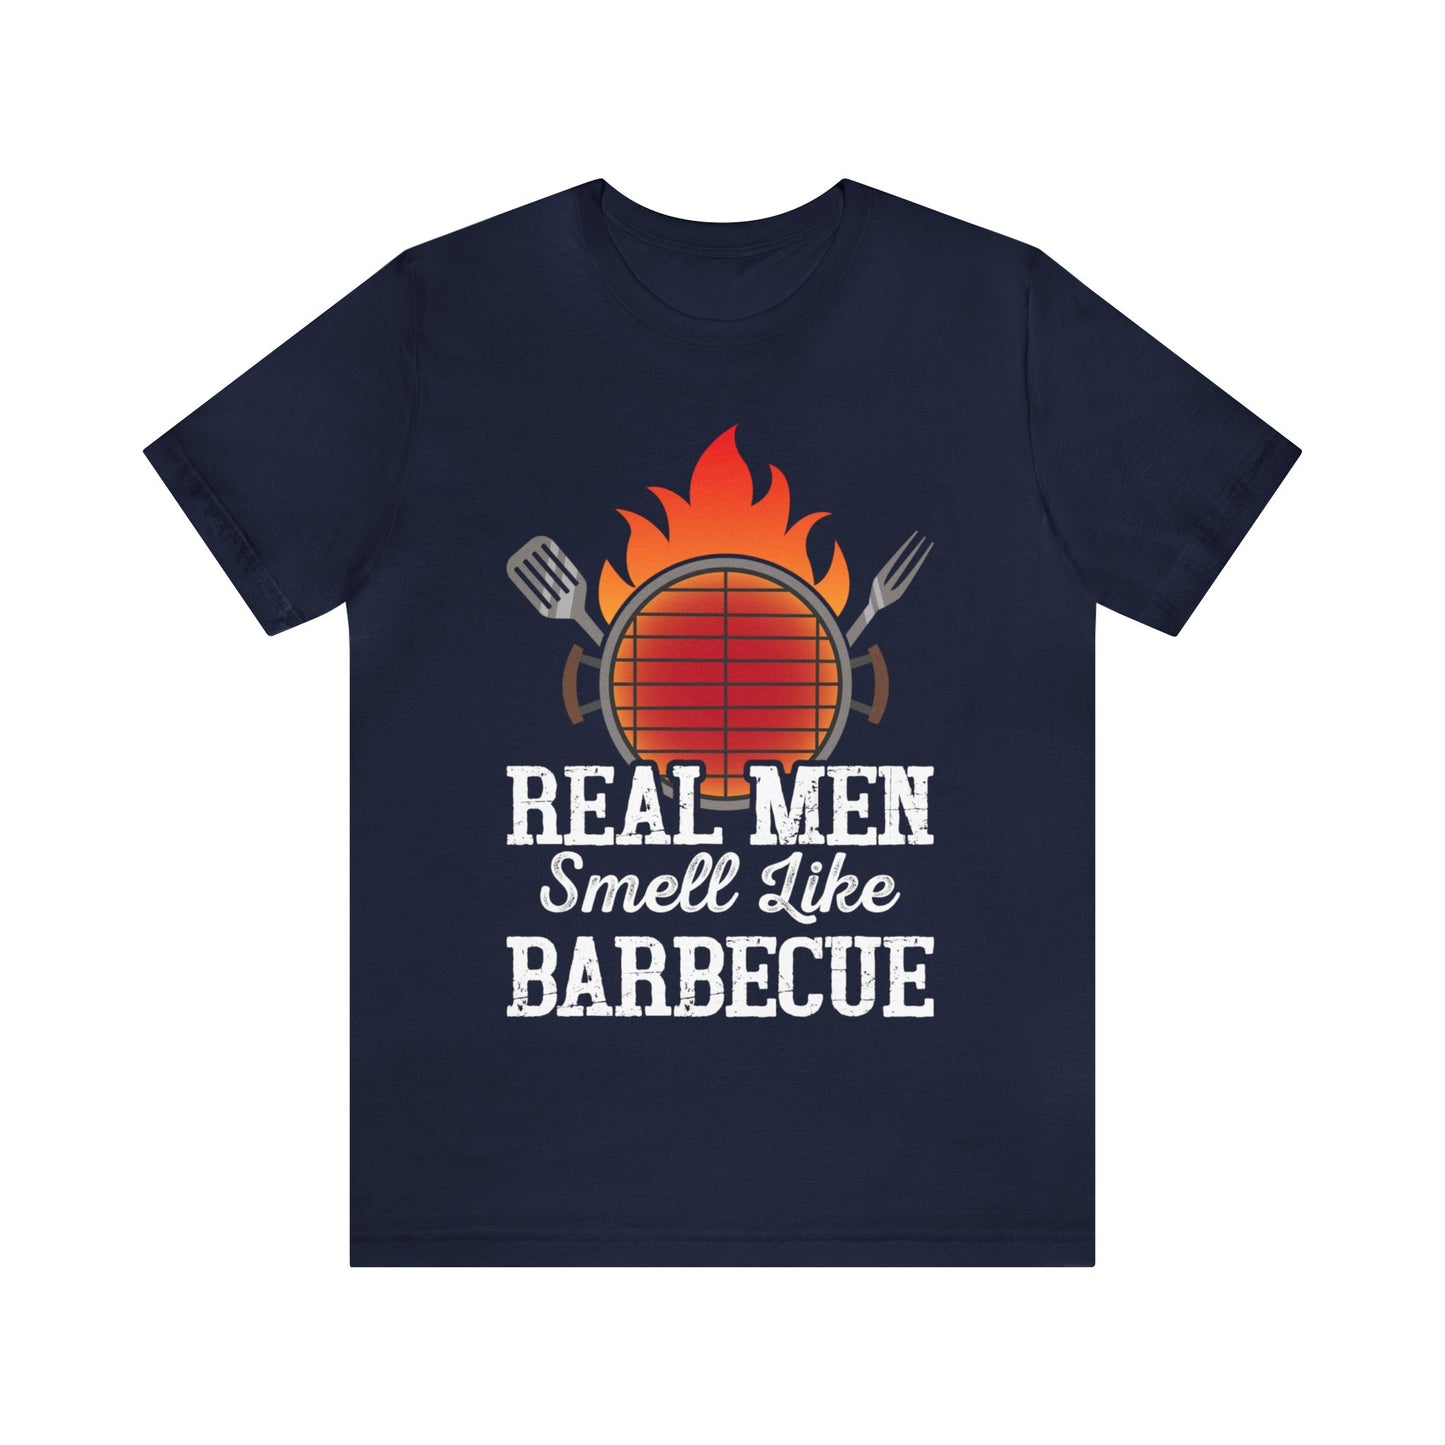 Real man smell like Barbecue T-Shirt